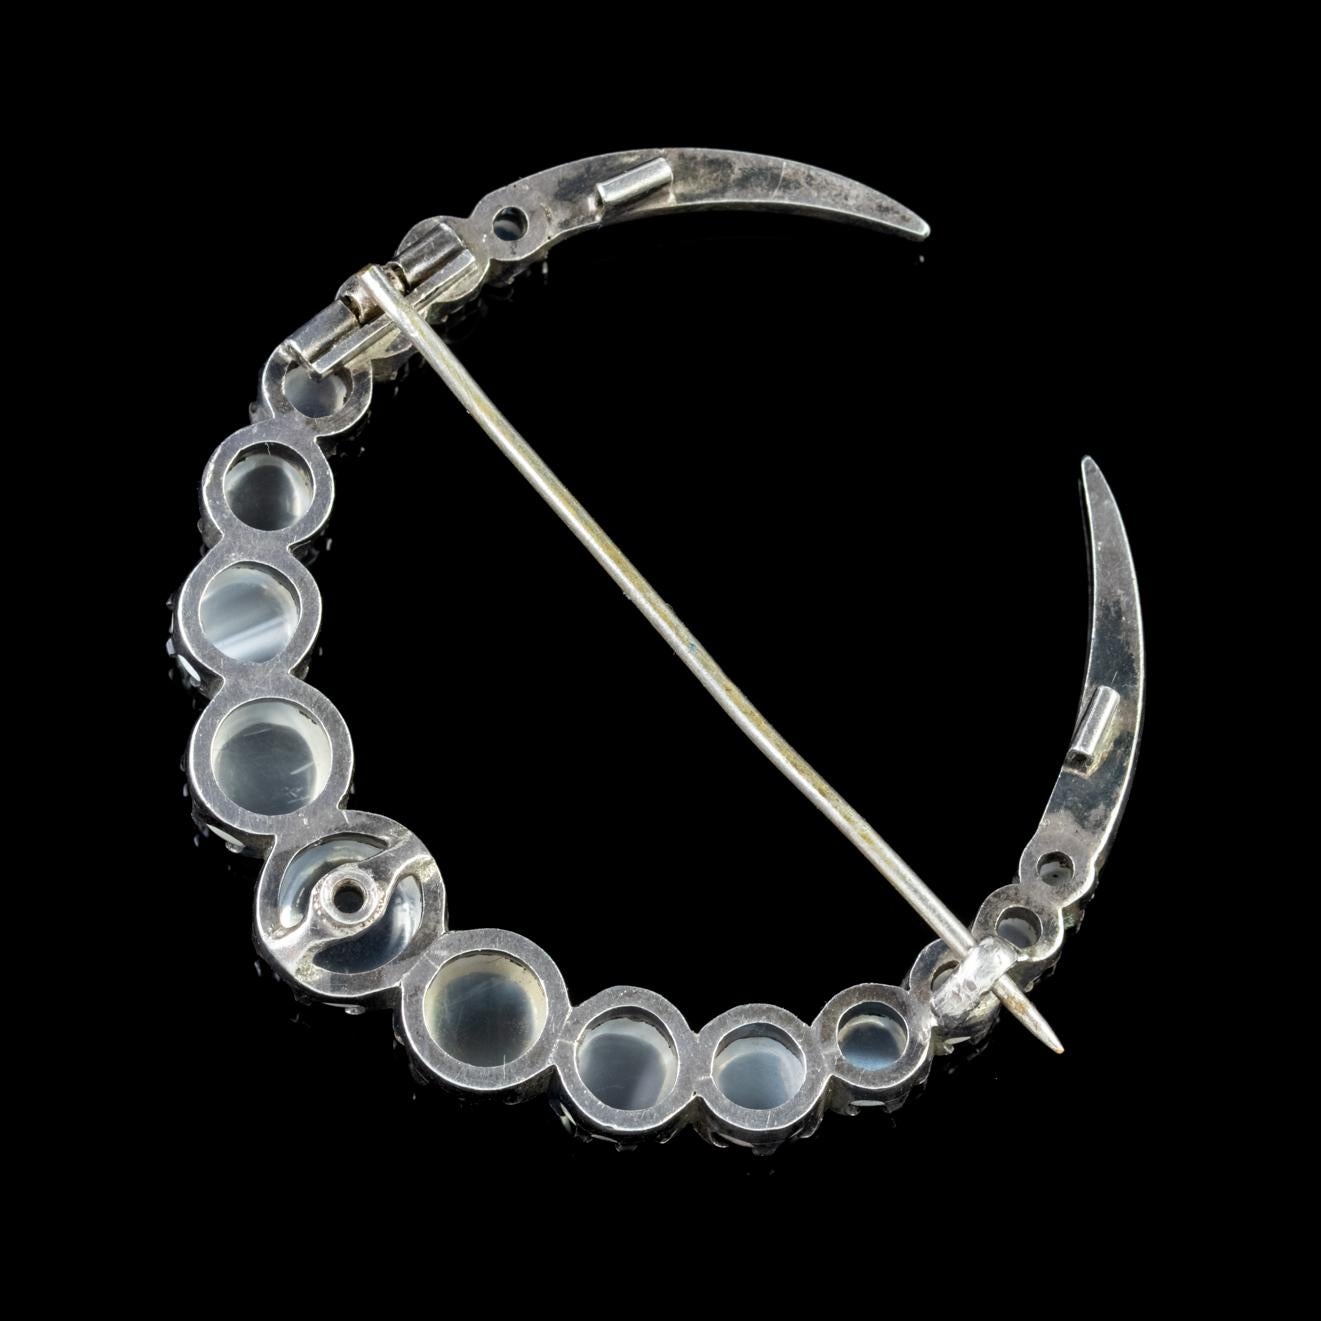 A fabulous late Victorian Silver crescent moon brooch claw set with beautiful Moonstones which graduate in size from a 2.3ct down to a 0.10ct stone. 

Crescent moons were a symbol of the feminine moon goddess and represented change and female